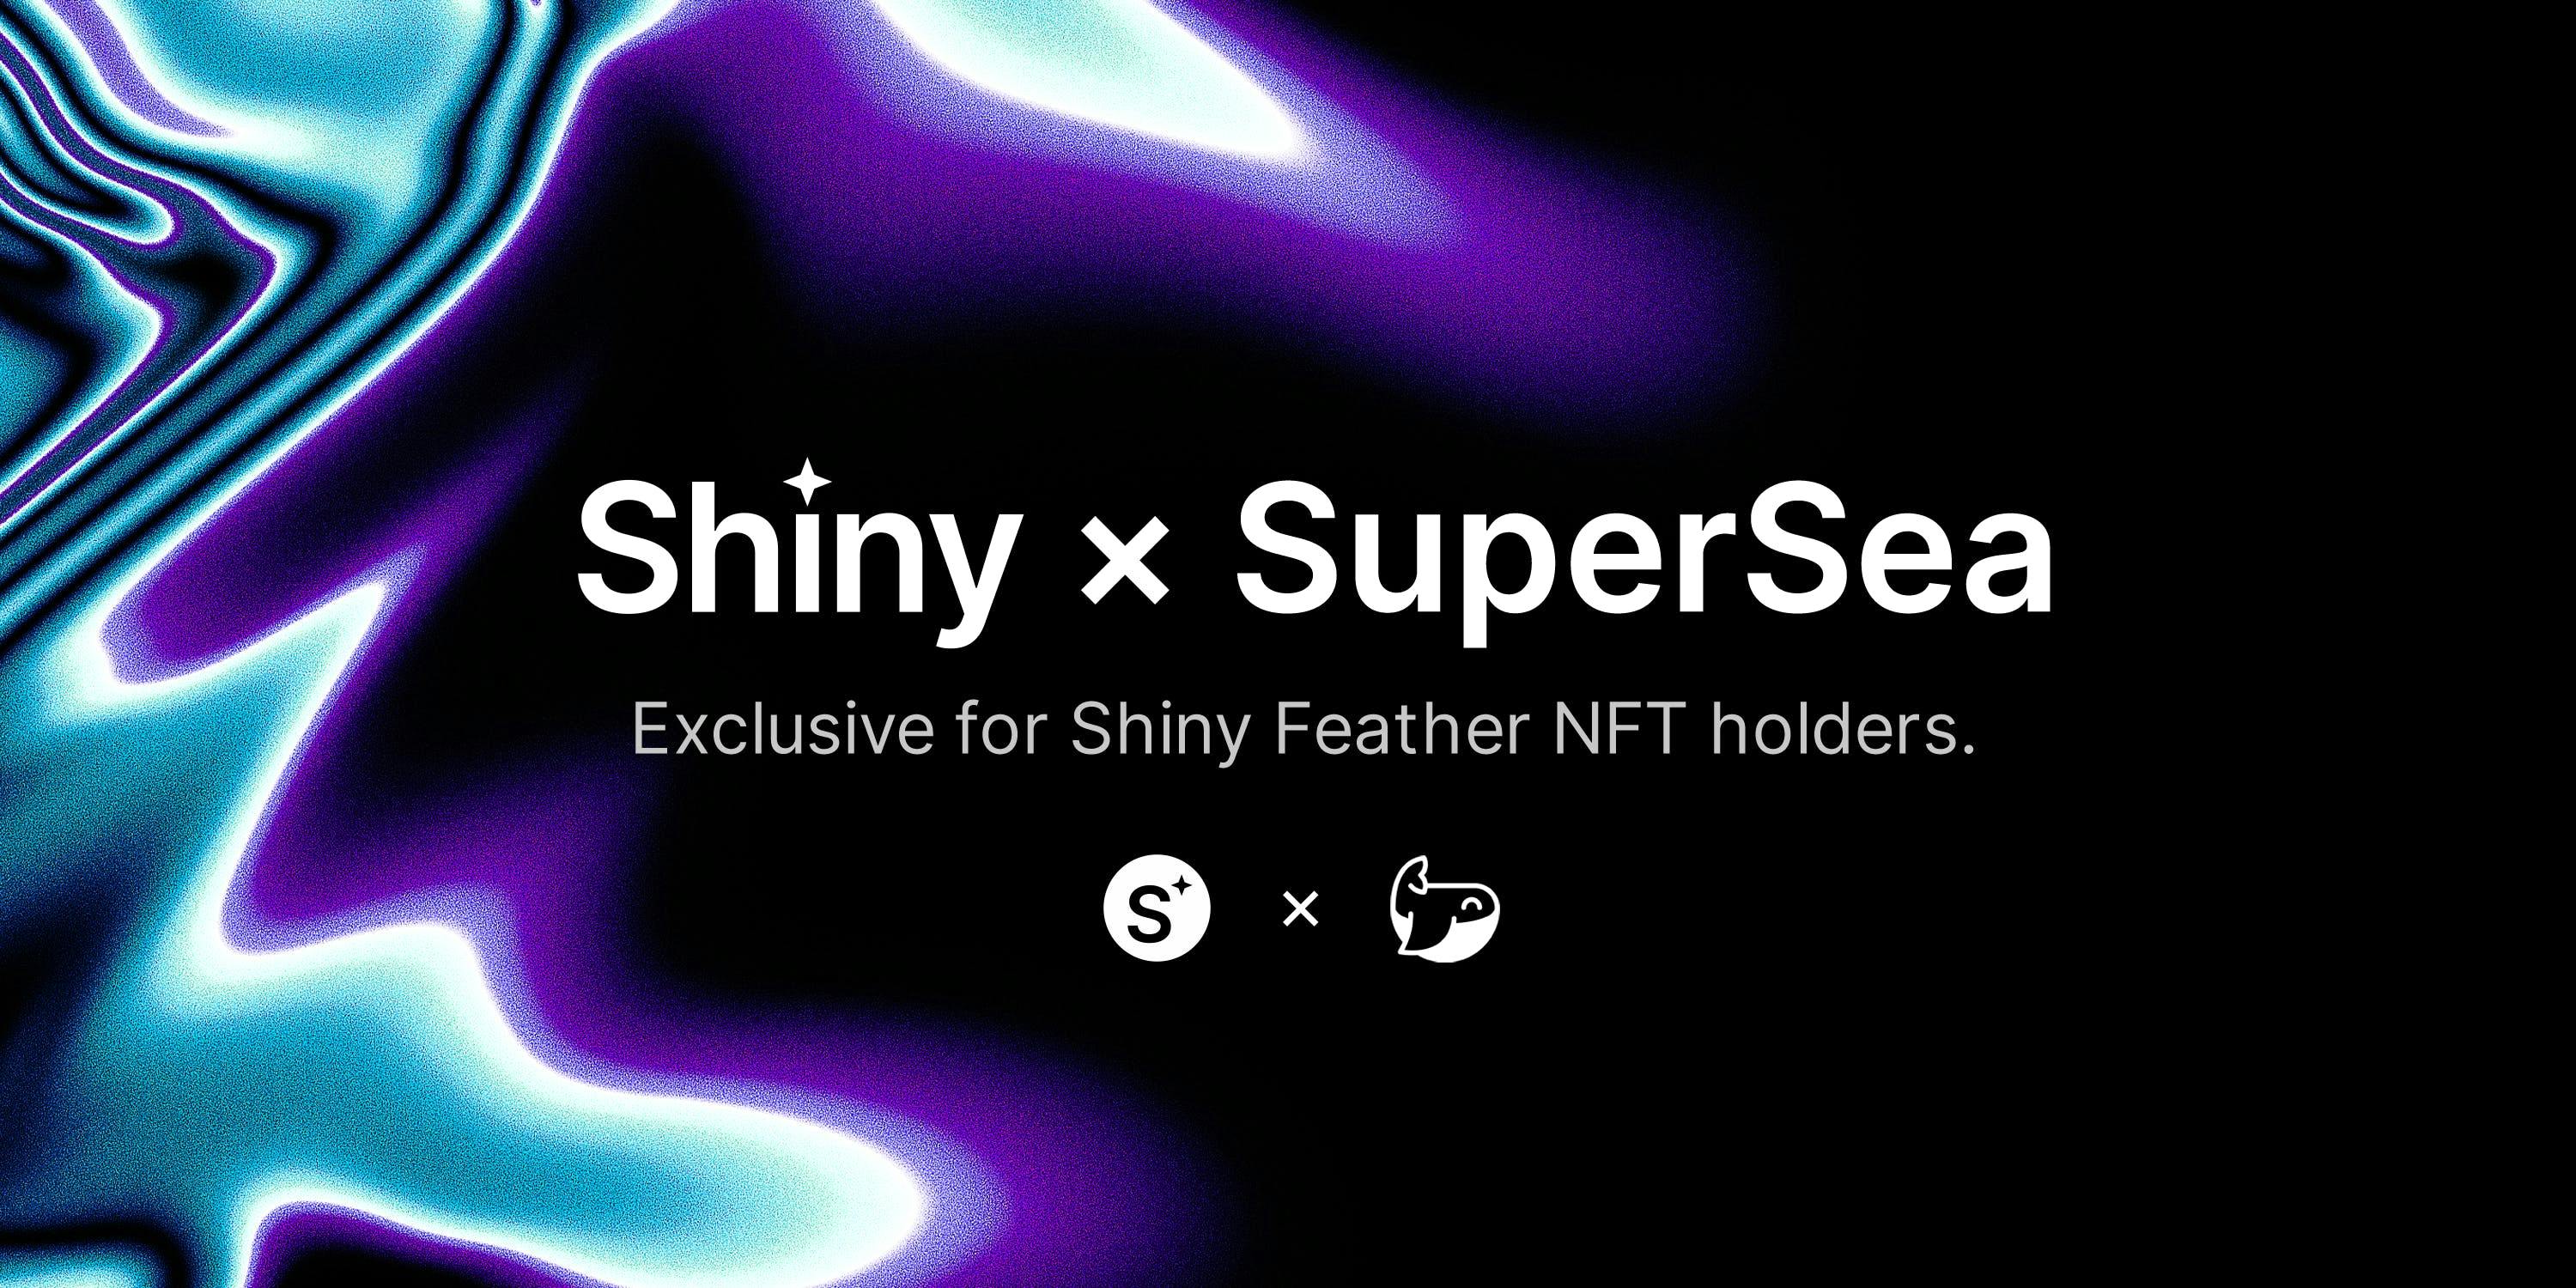 Supersea has been an invaluable tool used by NFT collectors that have taken a more strategic approach to collecting.